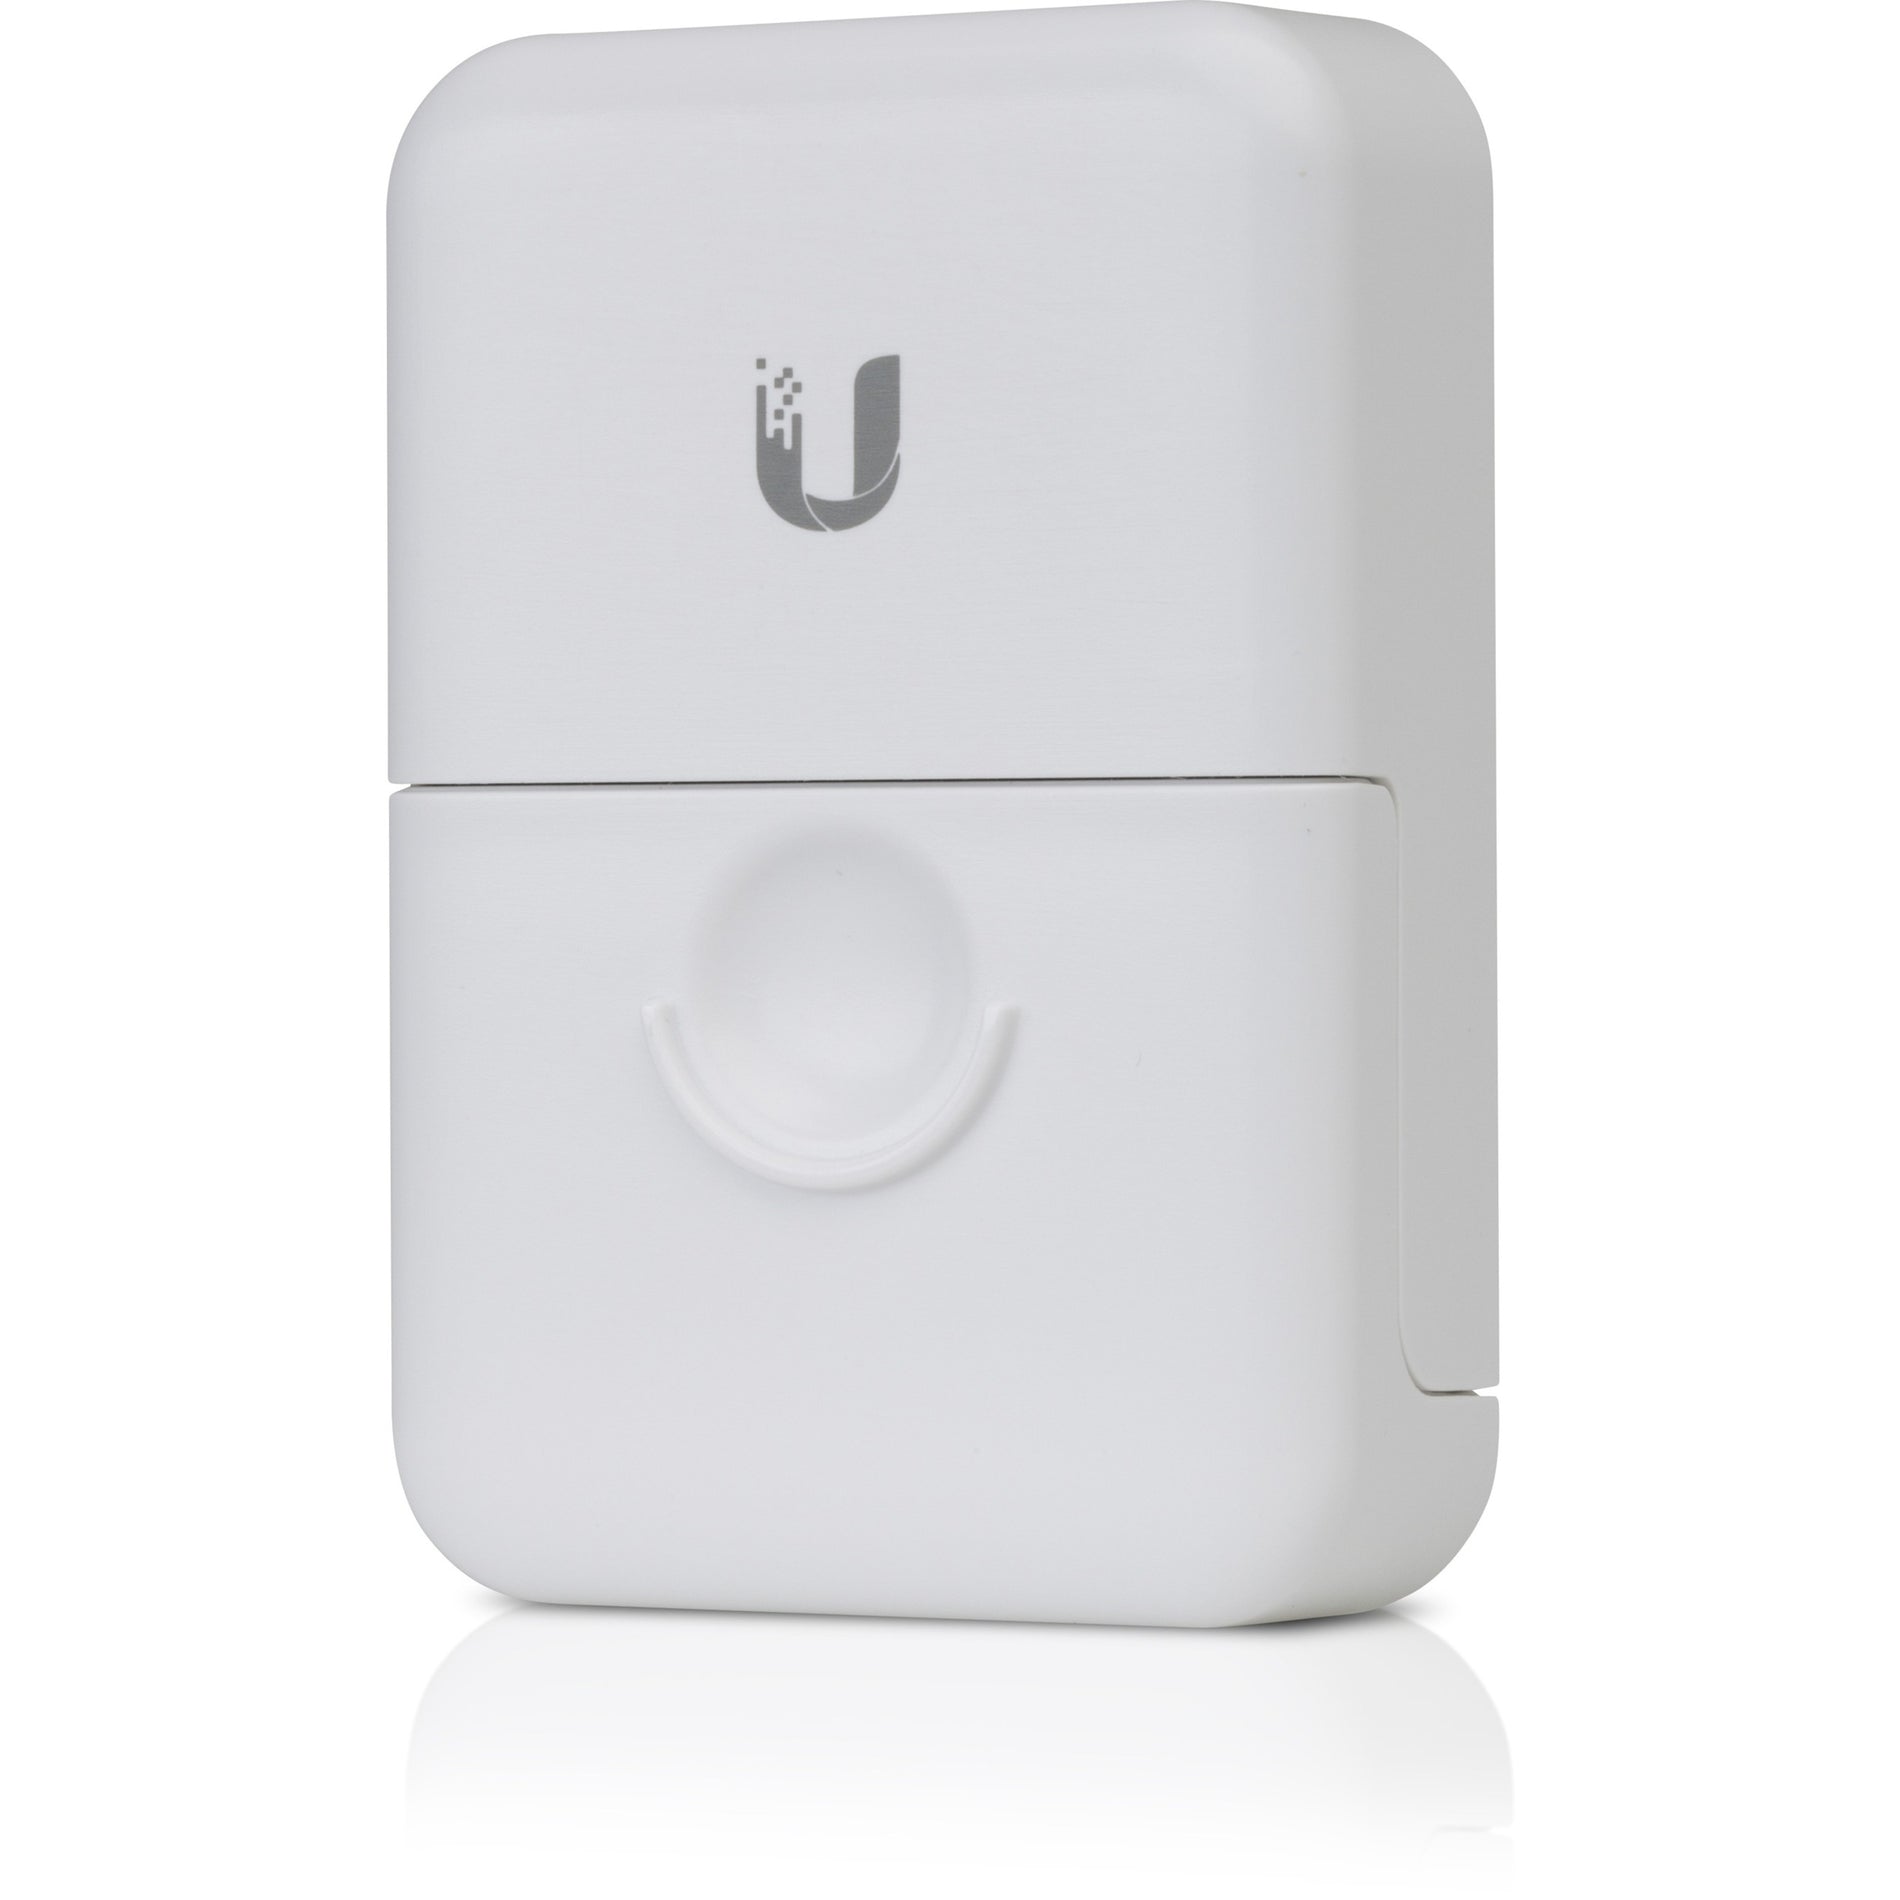 Ubiquiti ETH-SP-G2 Surge Suppressor/Protector - Protect Your Electronics from Power Surges